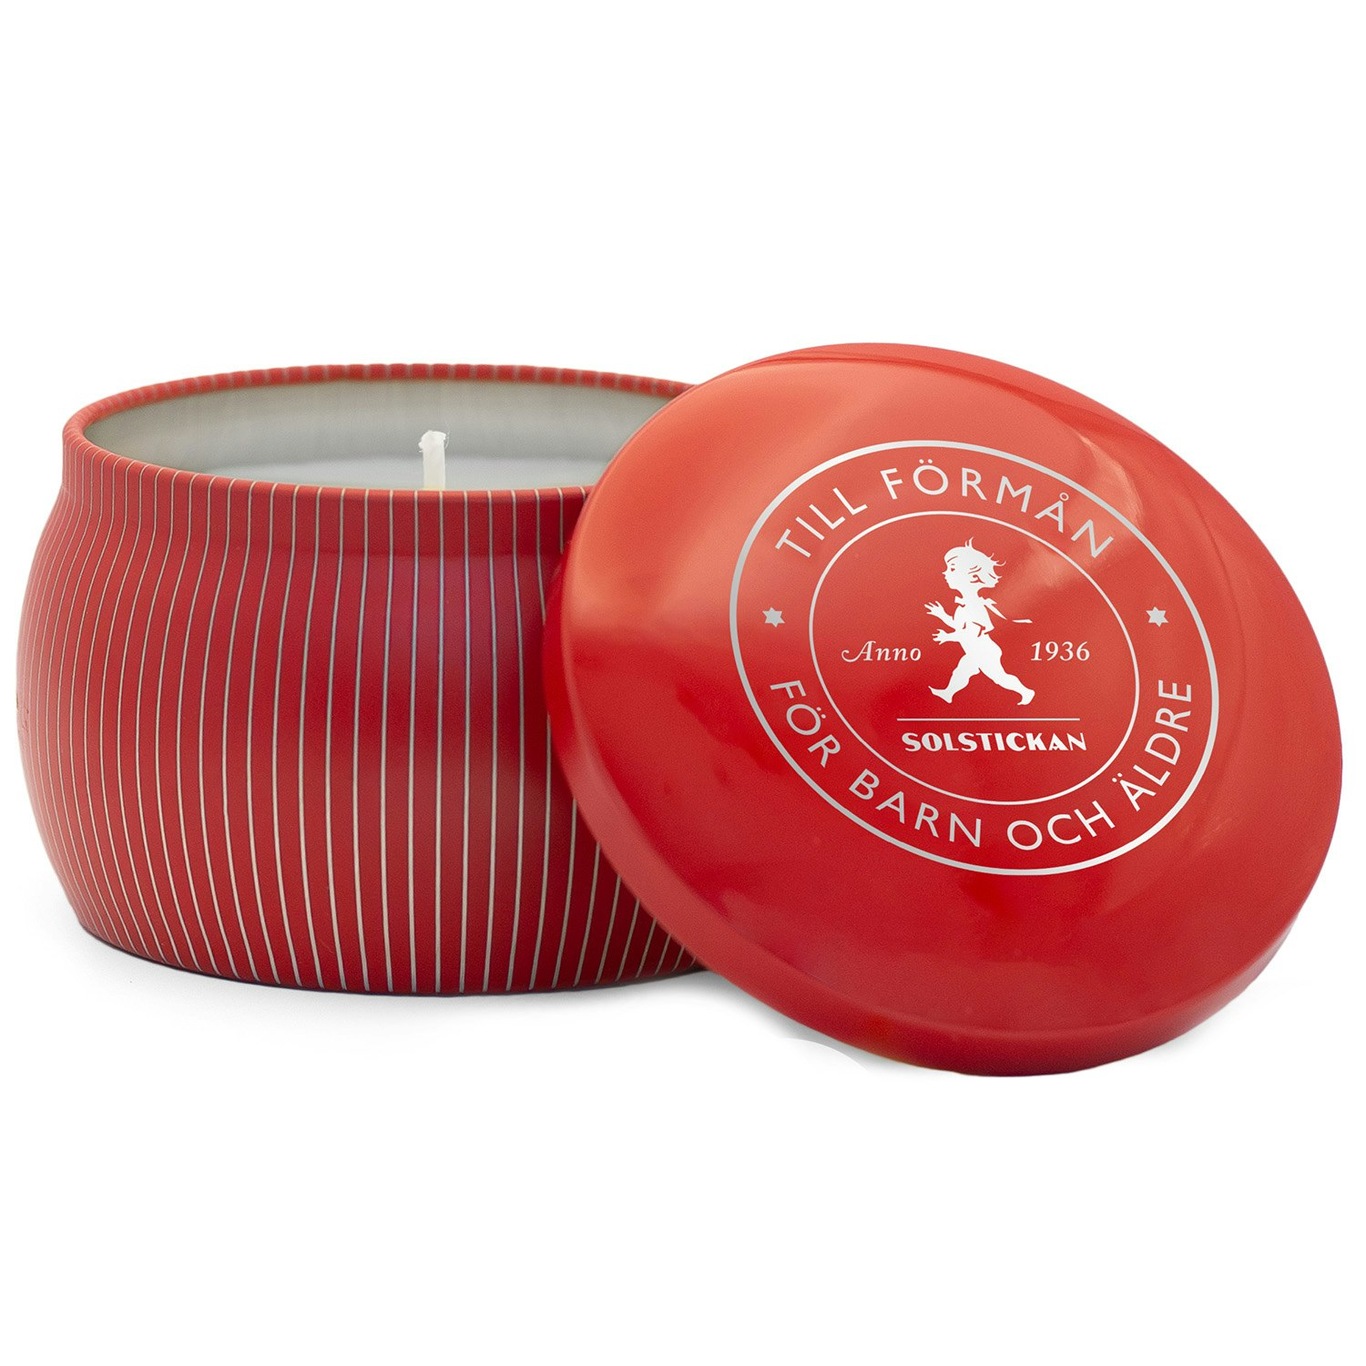 Scented Candle Kanel & Apelsin, Red